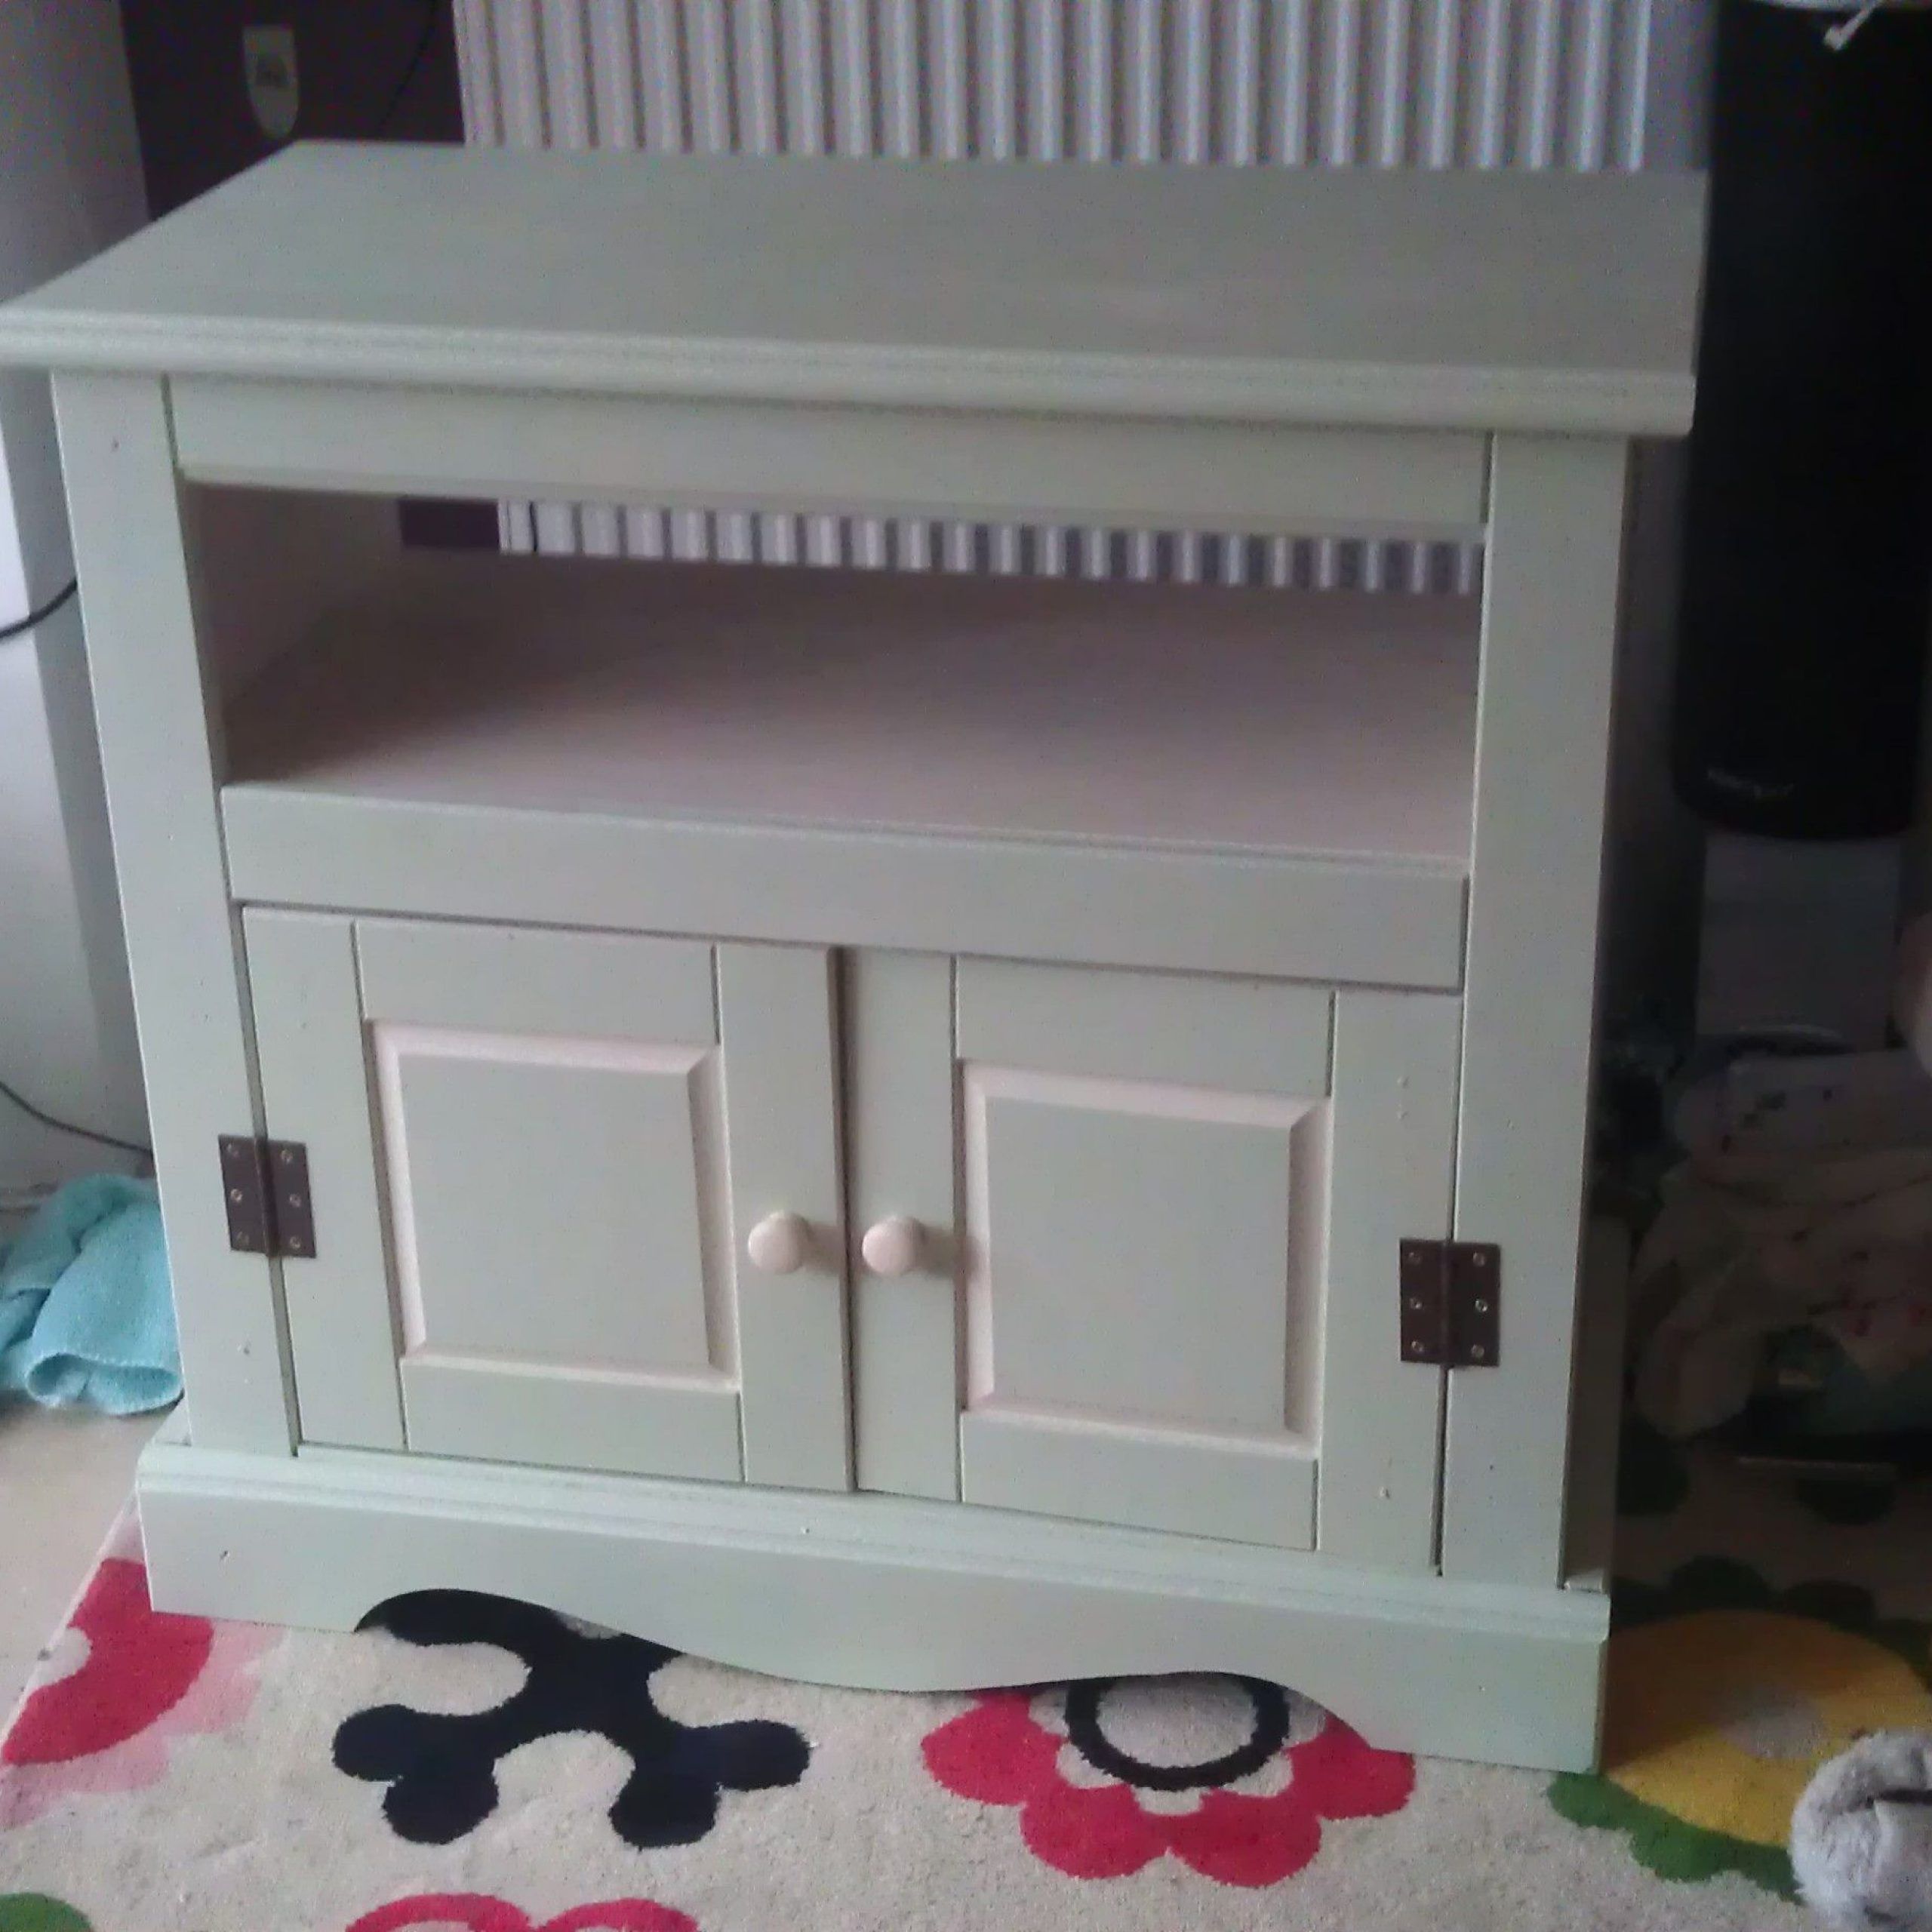 My New (old) Shabby Chic Tv Cabinet | Tv Cabinets, Shabby Throughout Shabby Chic Tv Cabinet (View 15 of 15)